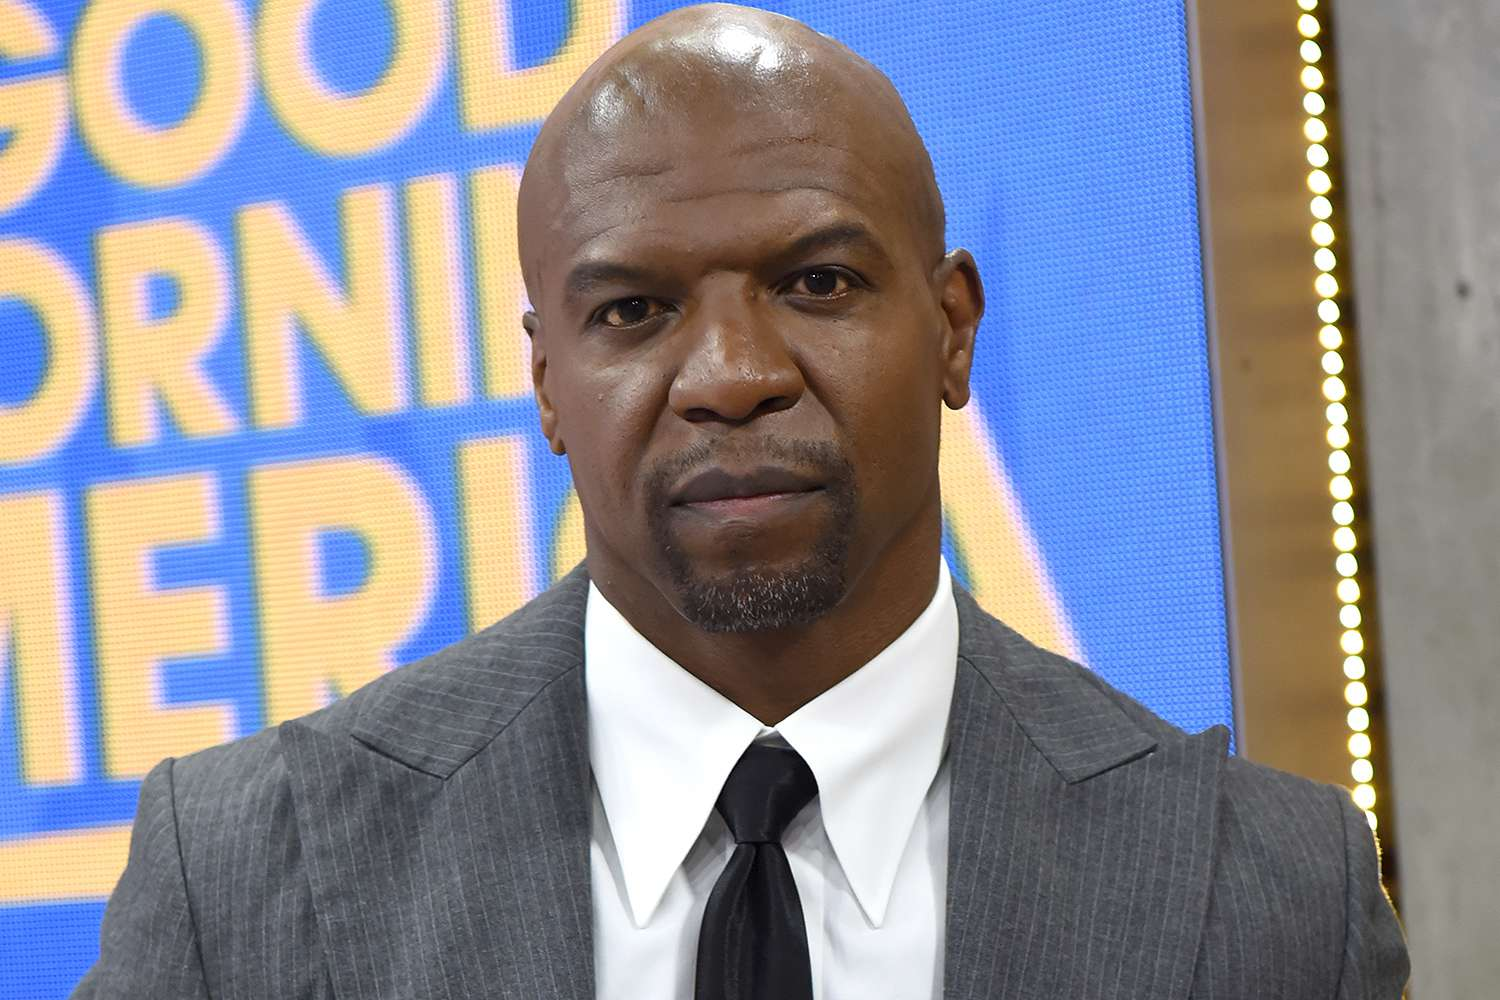 Terry Crews has gone through therapy